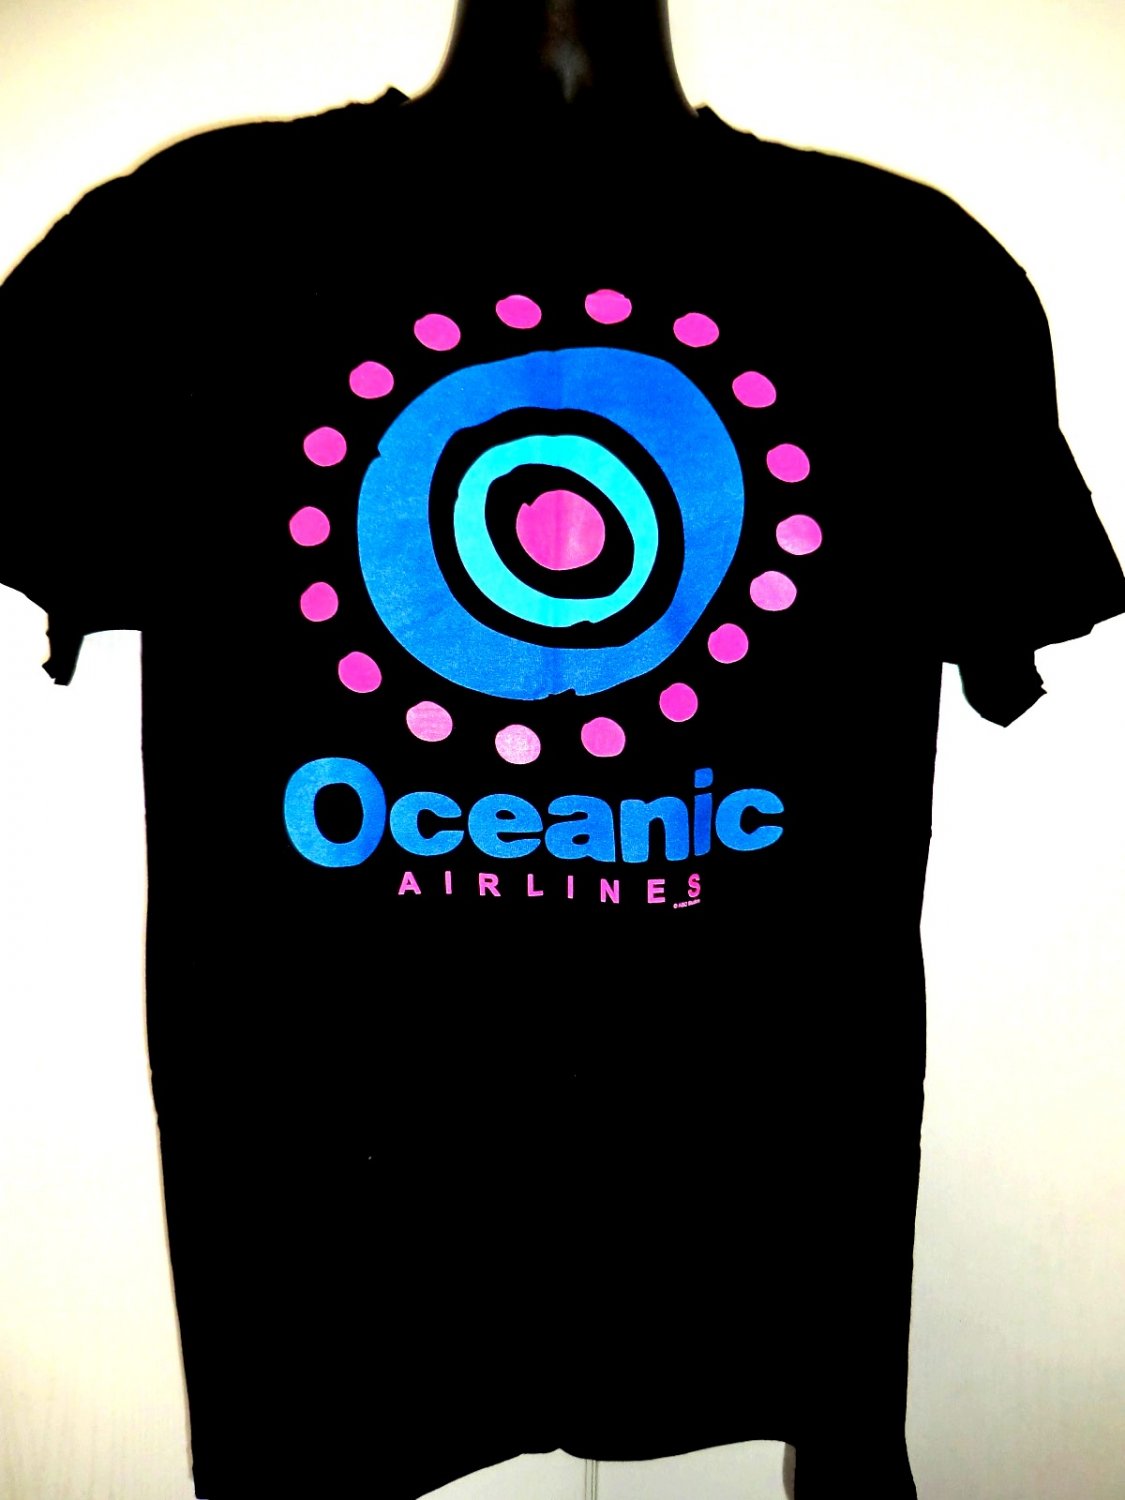 OCEANIC Airlines T-Shirt Size Large